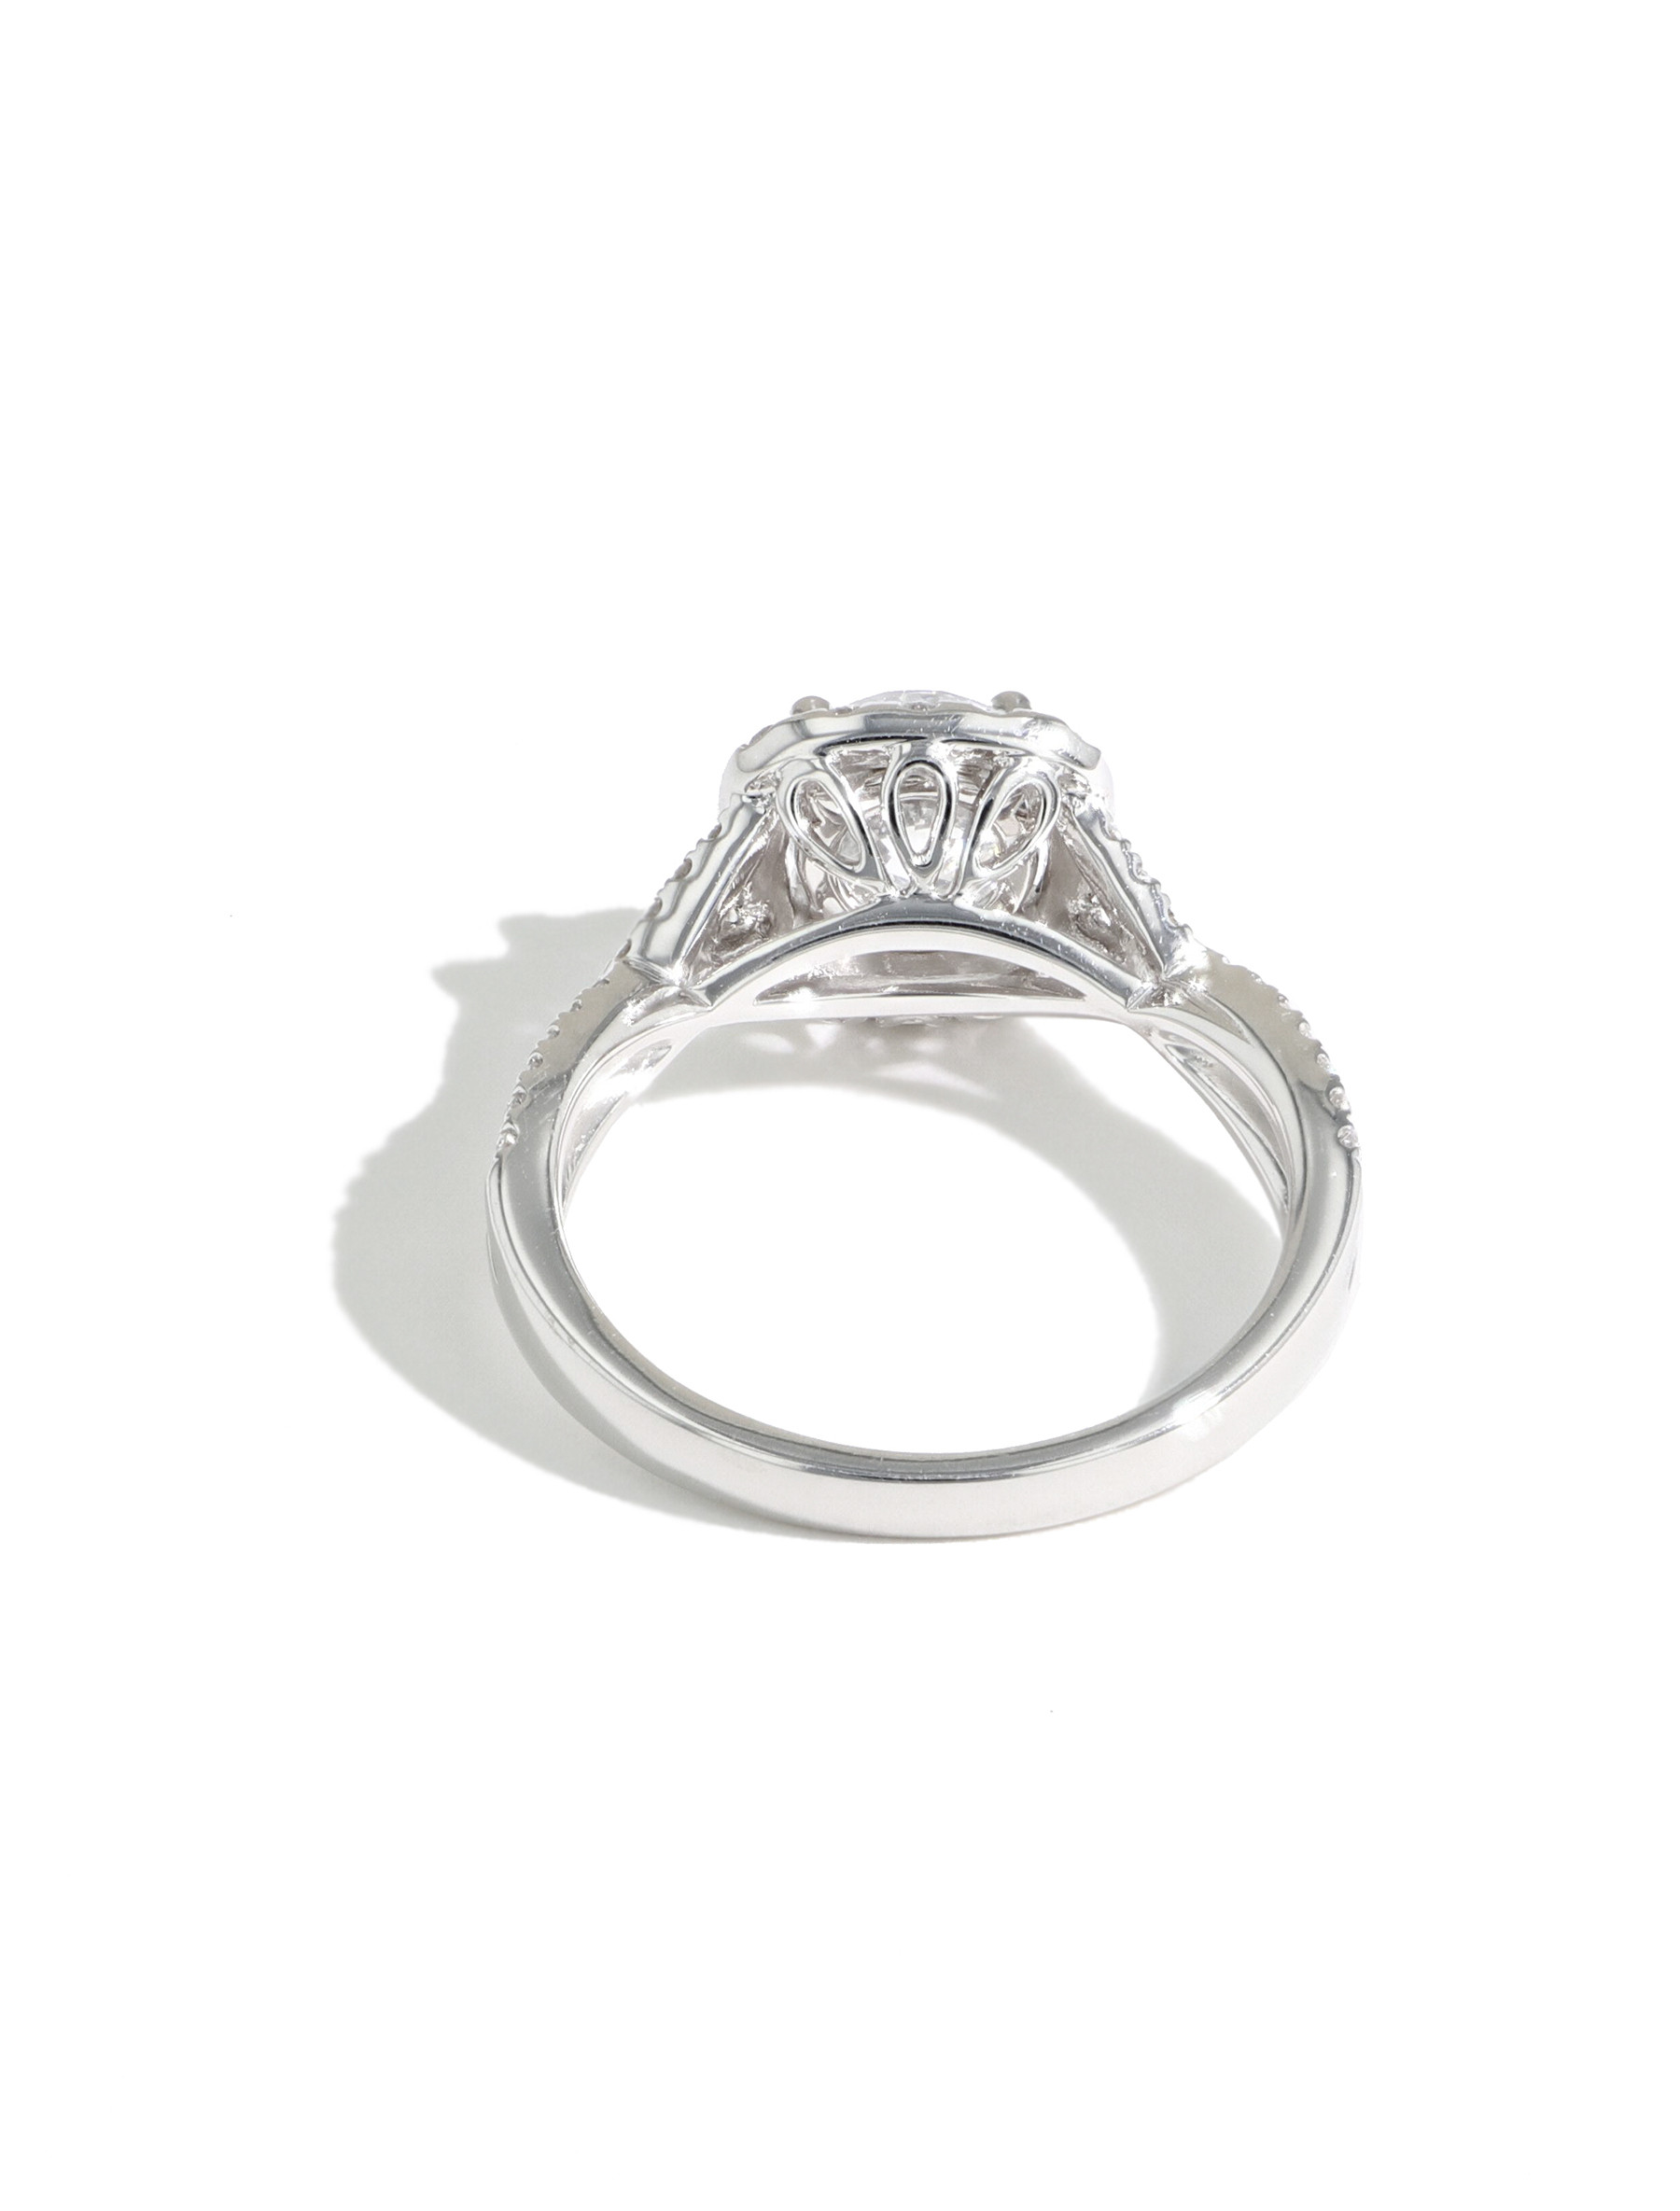 The Round Cushion Halo Twisted Engagement Ring Setting back view